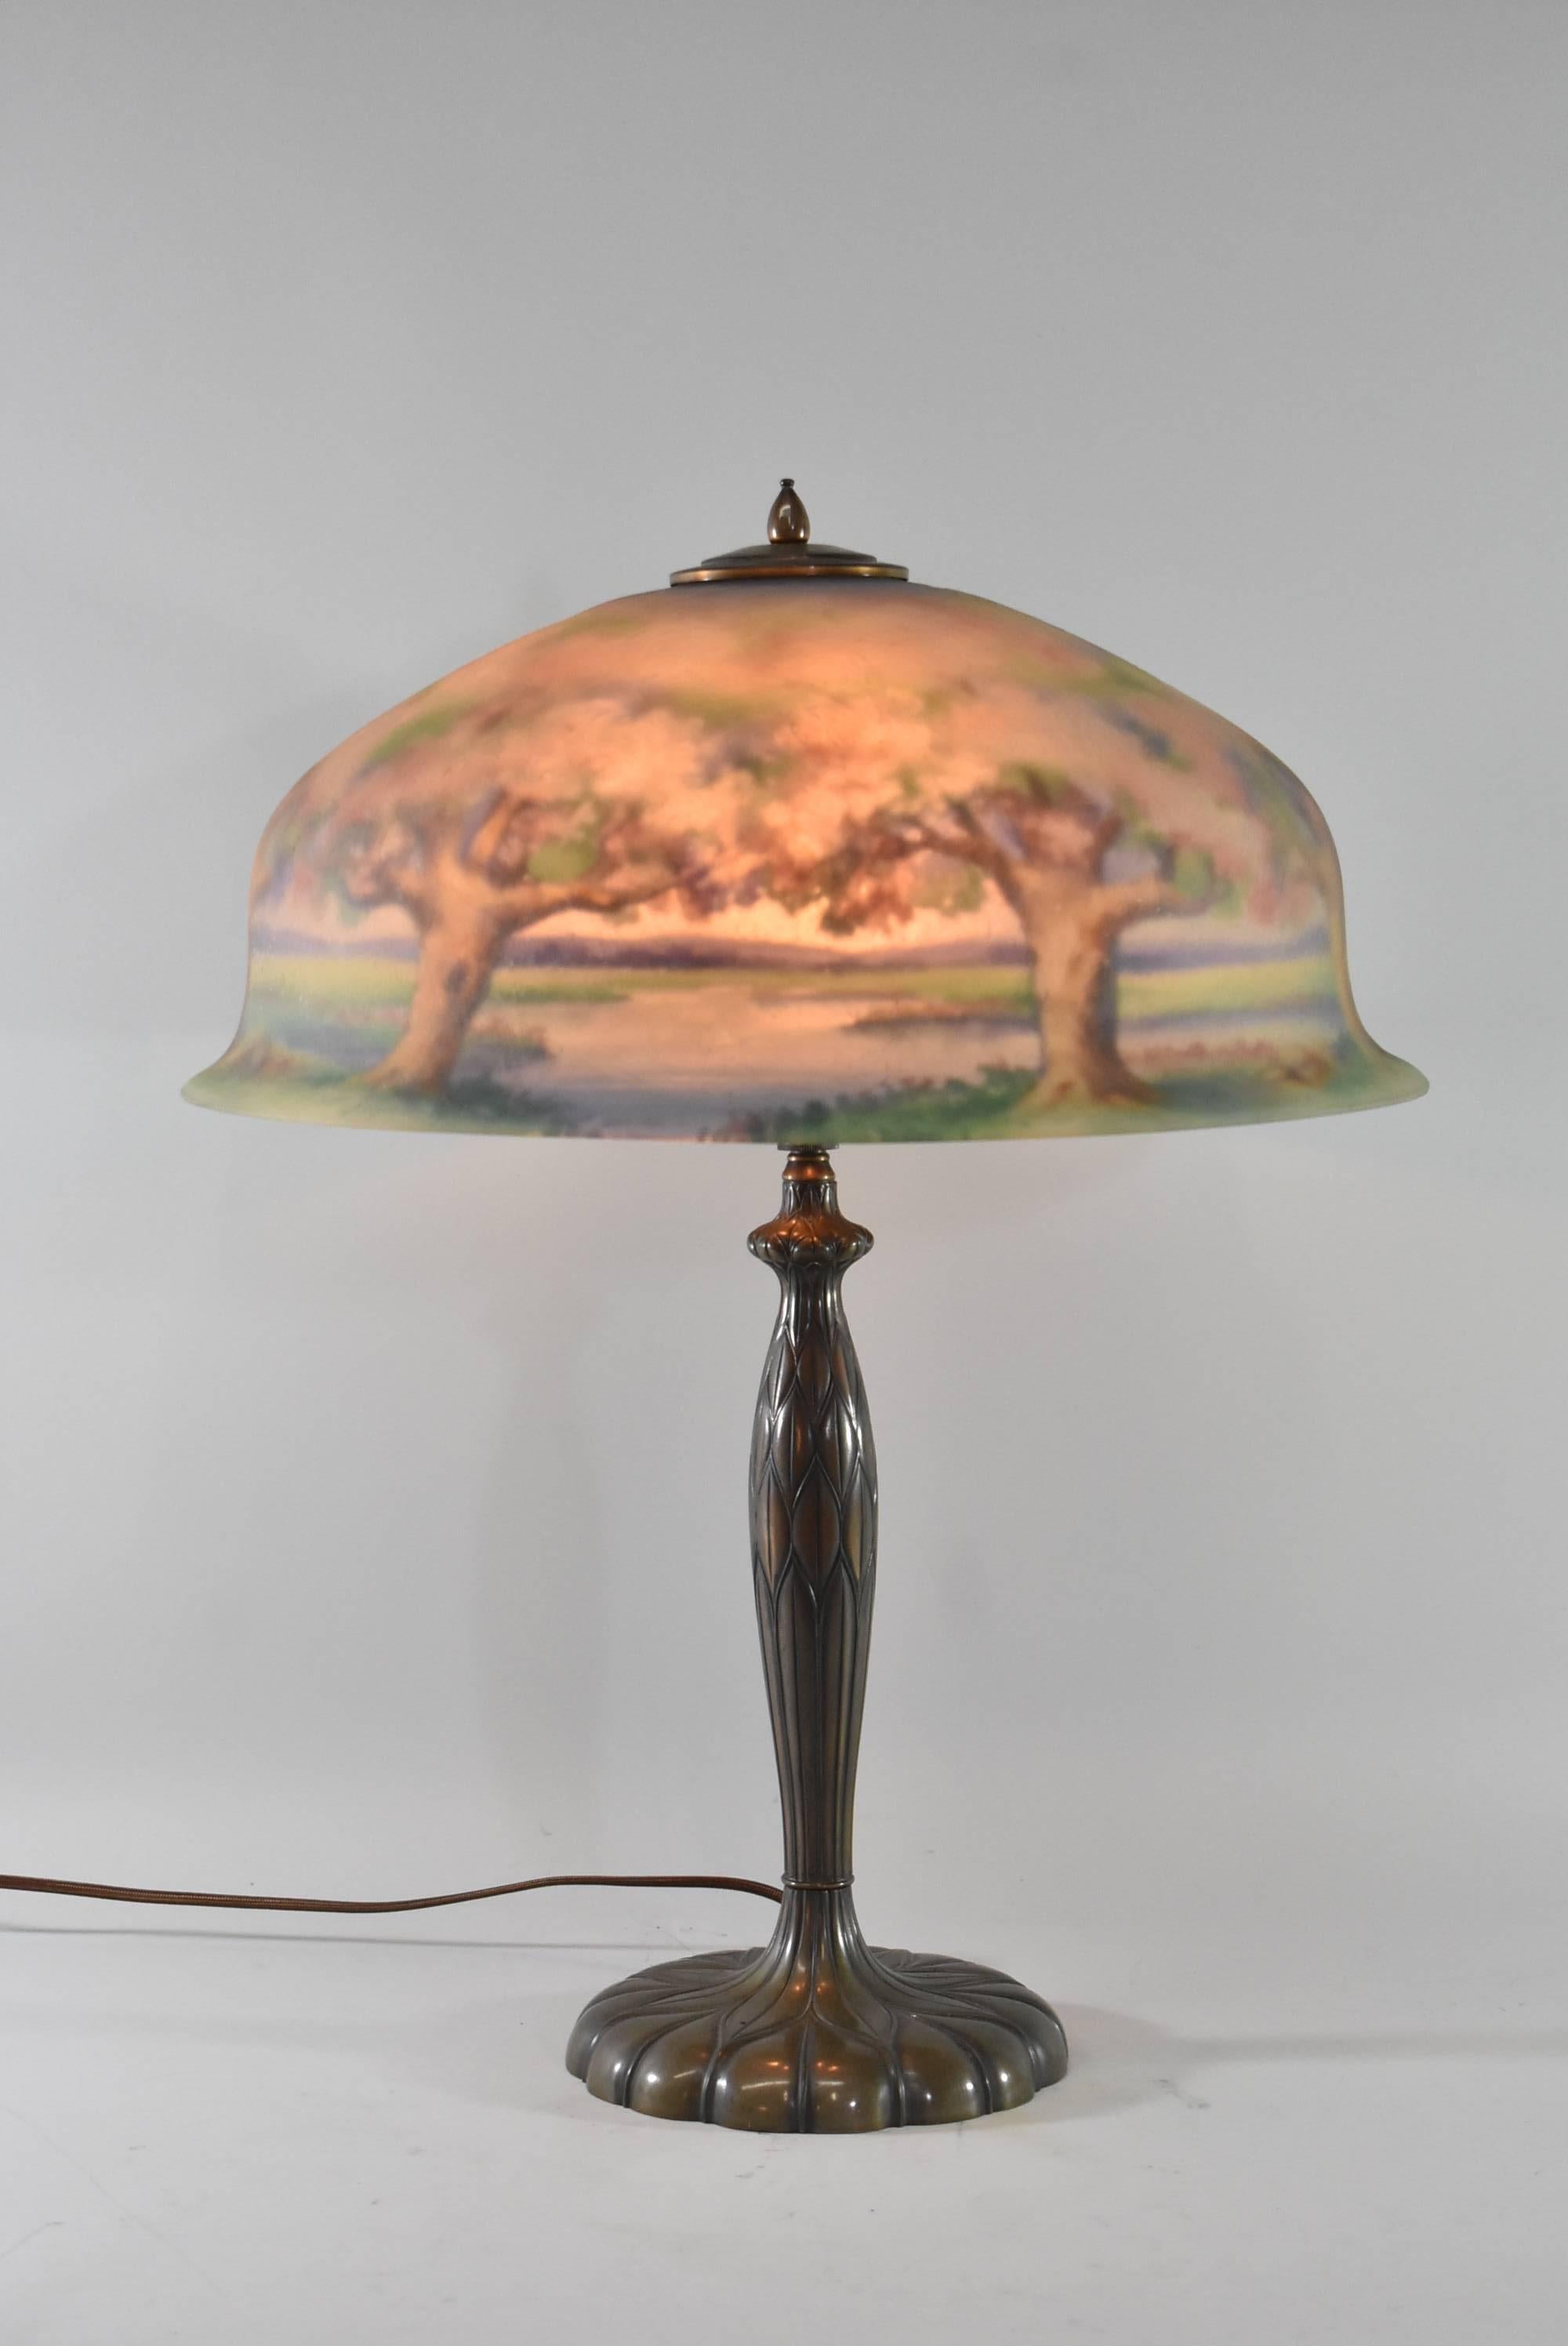 A beautiful reverse painted Pairpoint lamp signed by artist, W. Macy. This stunning lamp features three sockets and the shade depicts a forest scene in shades of blue, pink and green. The dimensions are 23